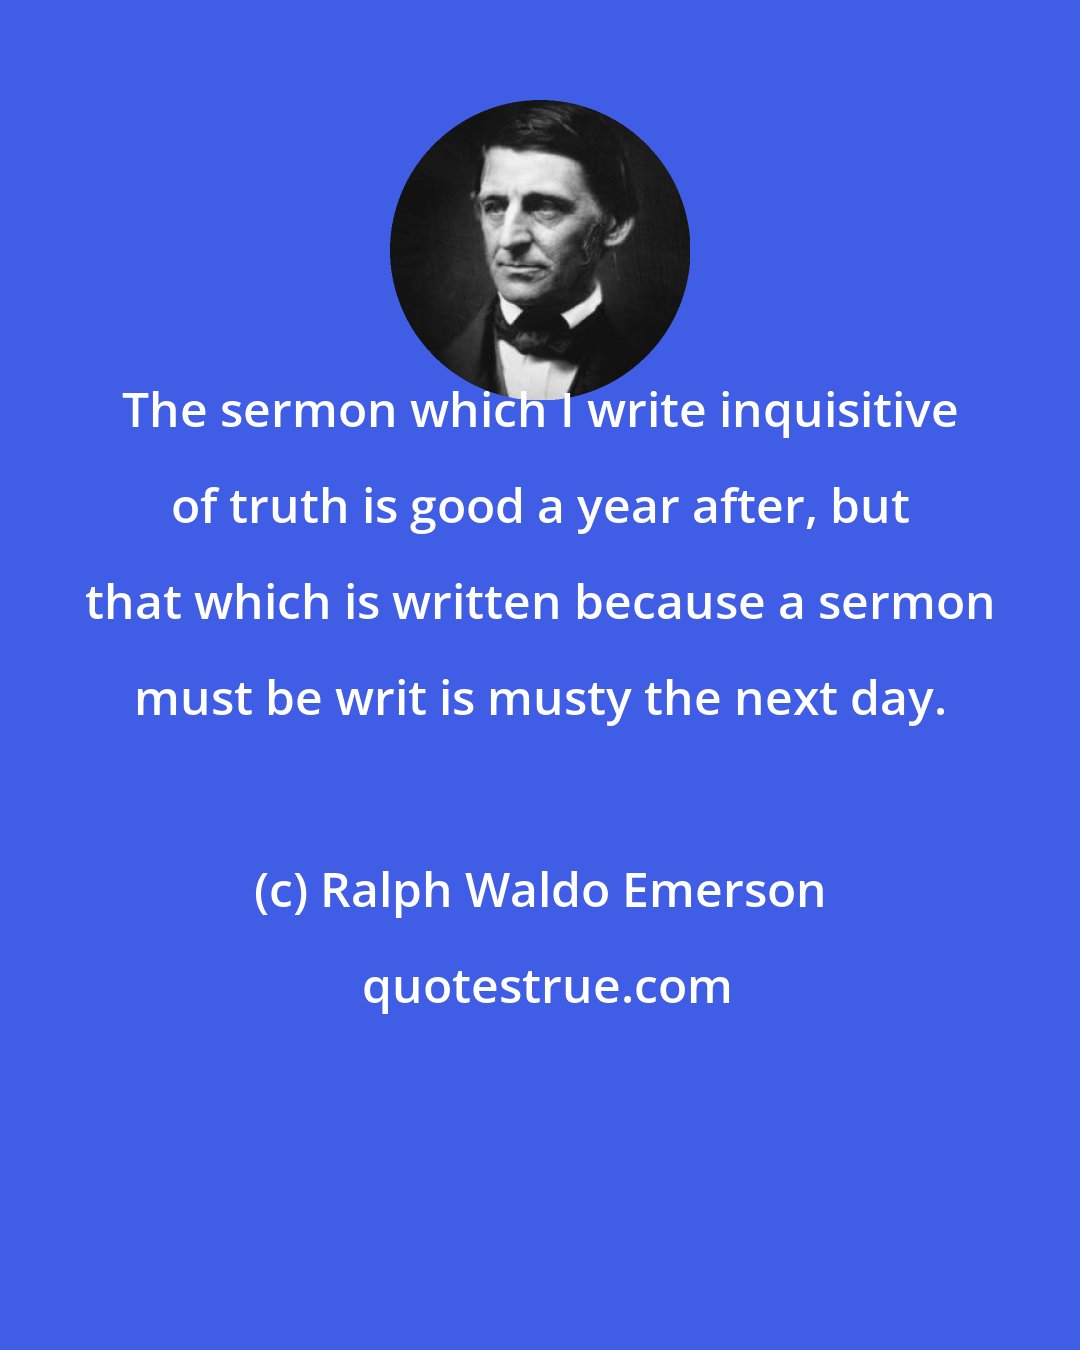 Ralph Waldo Emerson: The sermon which I write inquisitive of truth is good a year after, but that which is written because a sermon must be writ is musty the next day.